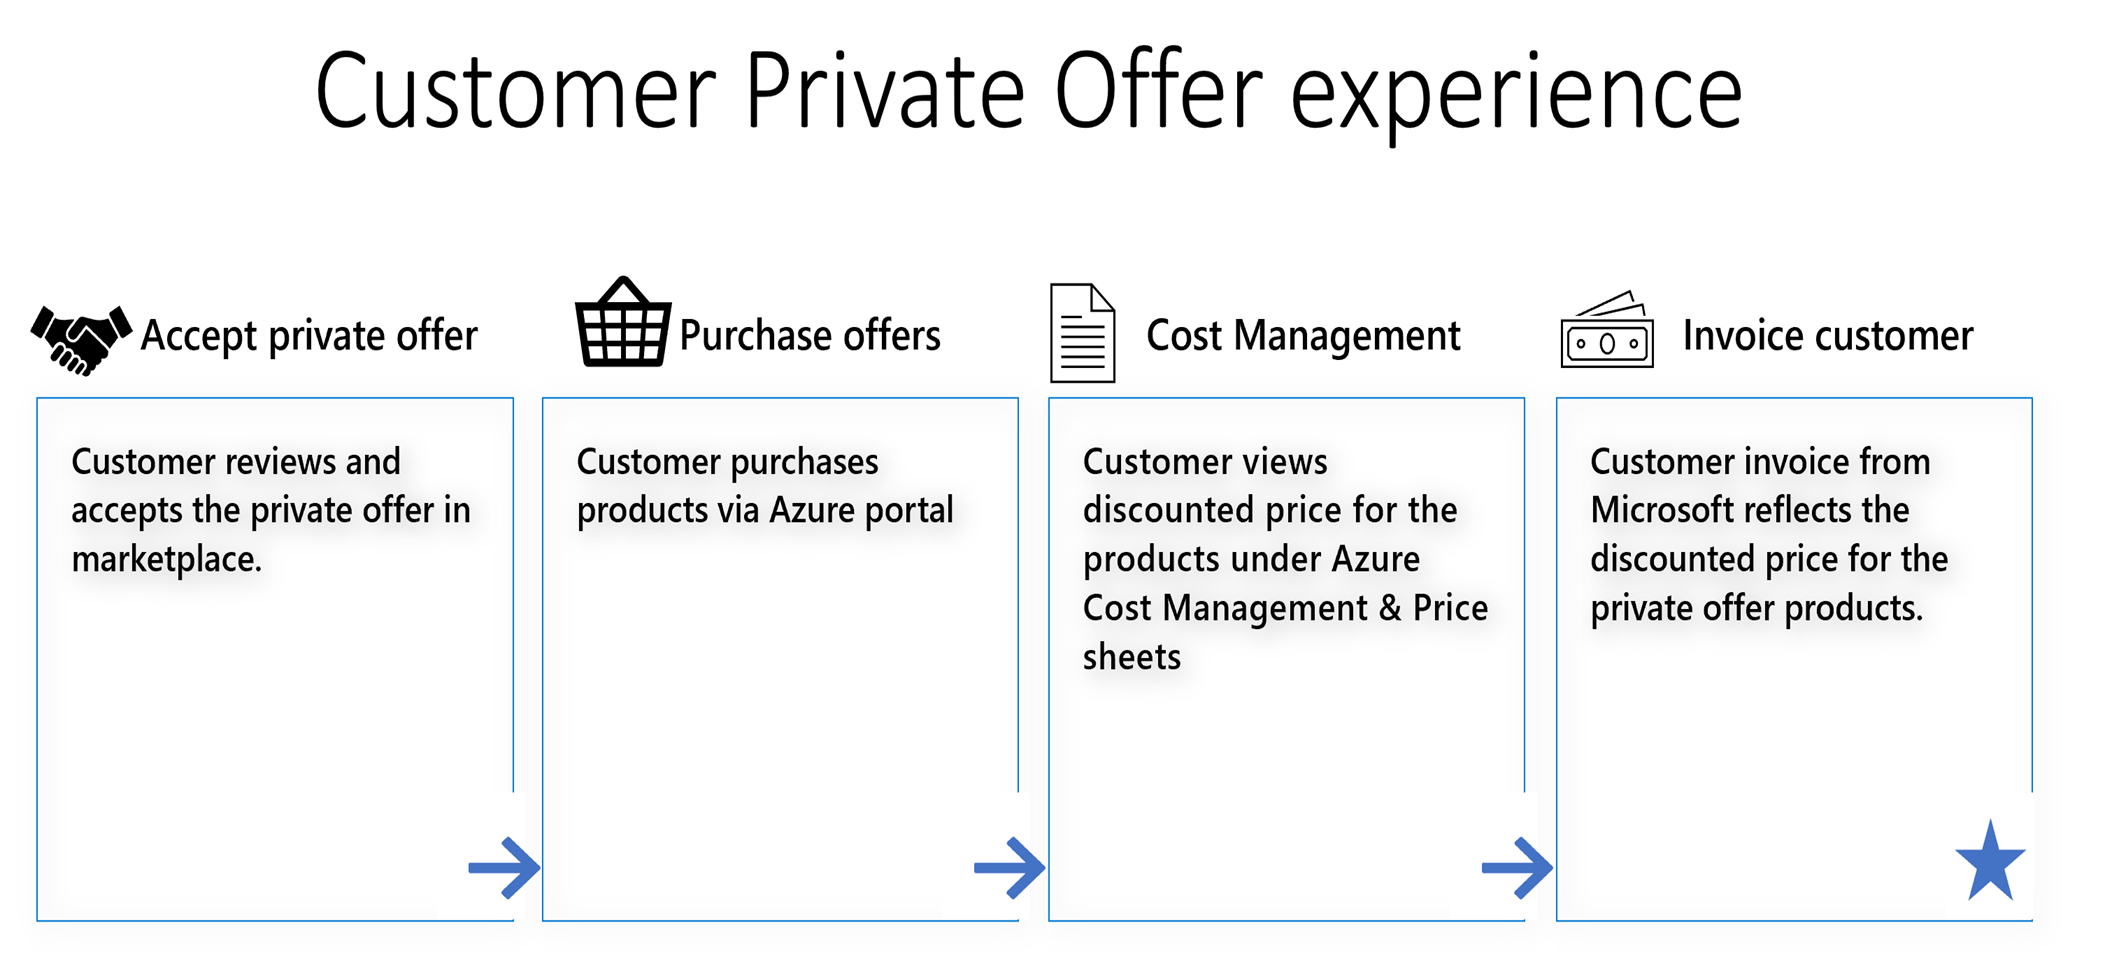 Shows the progression of the customer's private offer experience with ISVs.